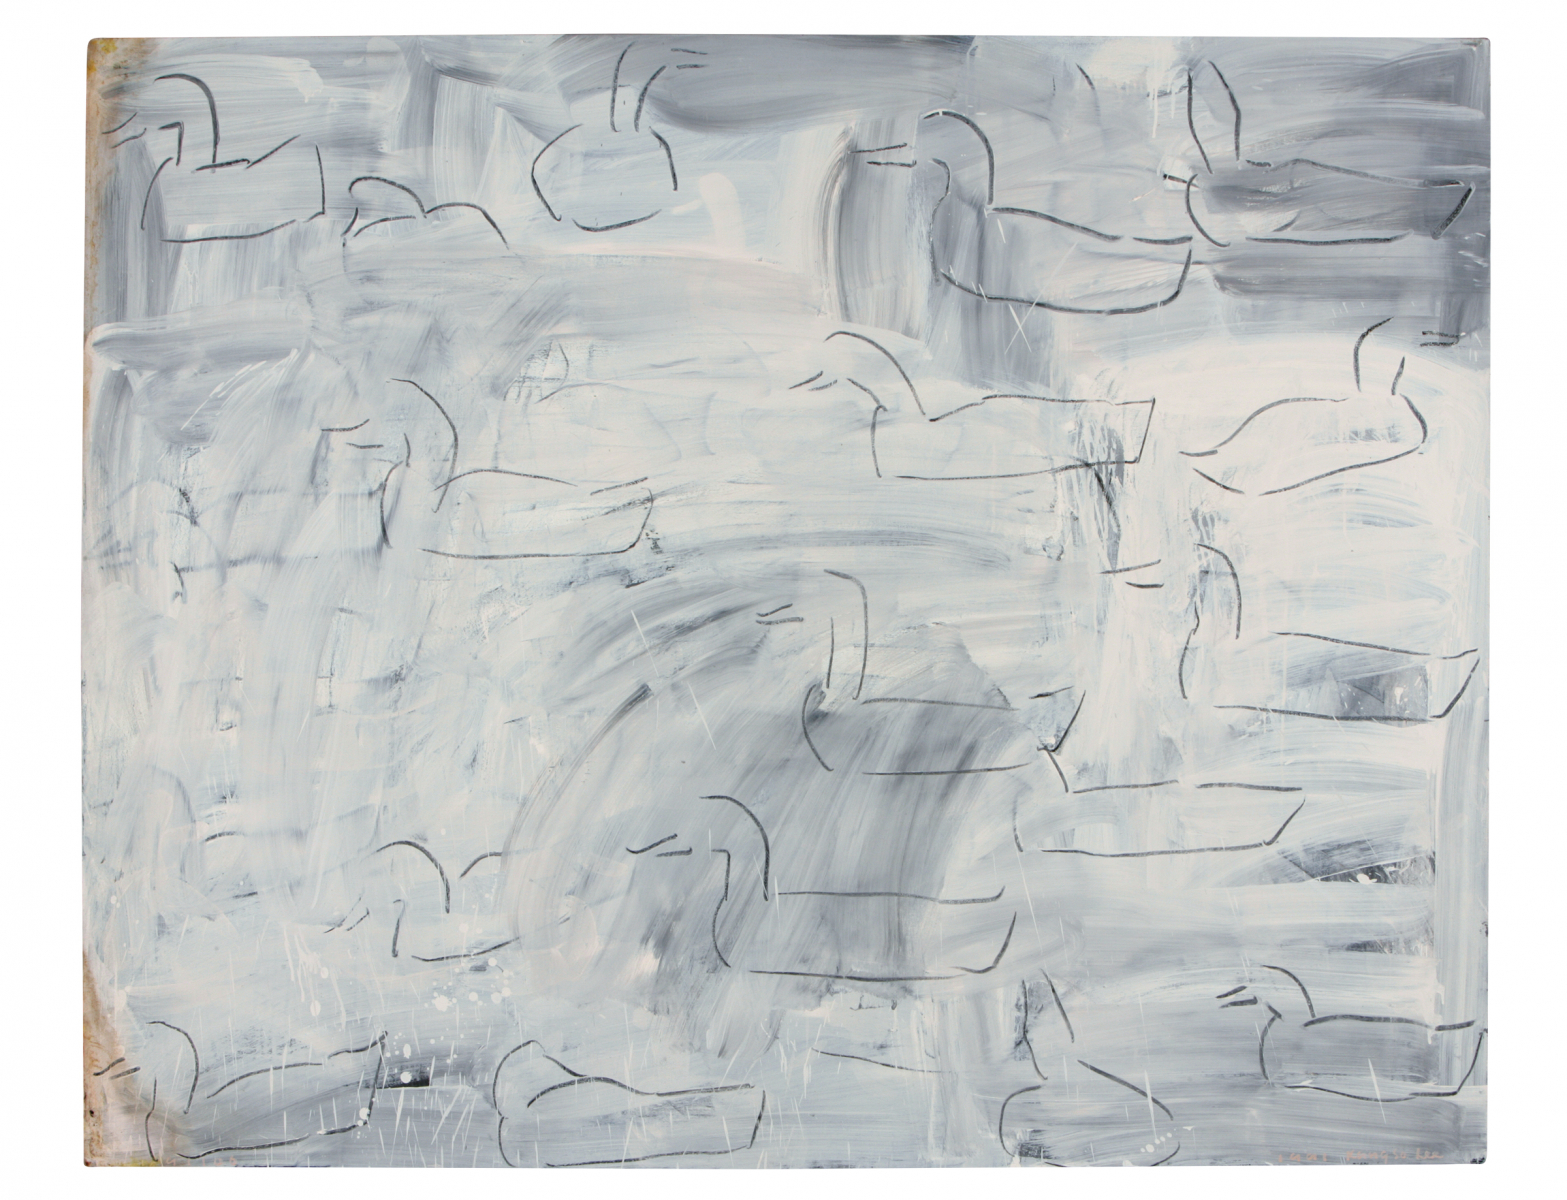 Untitled-91106, 1991, Oil on Canvas, 130.3x162cm